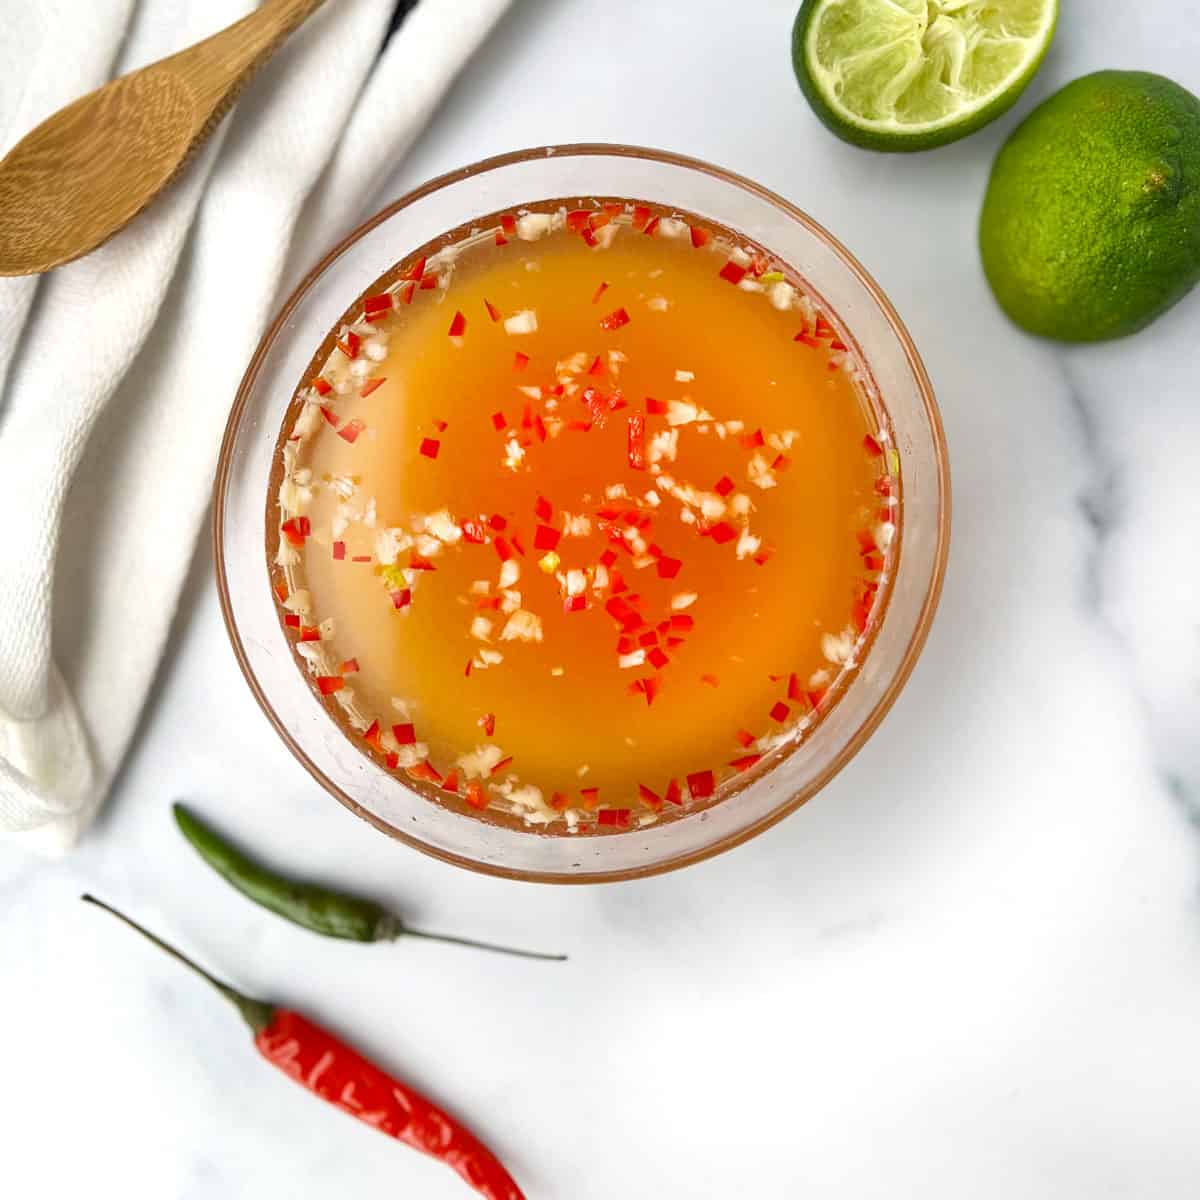 Vietnamese nước chấm sauce in a glass bowl with a couple of Thai chilis on the side and two halves of a squeezed lime.